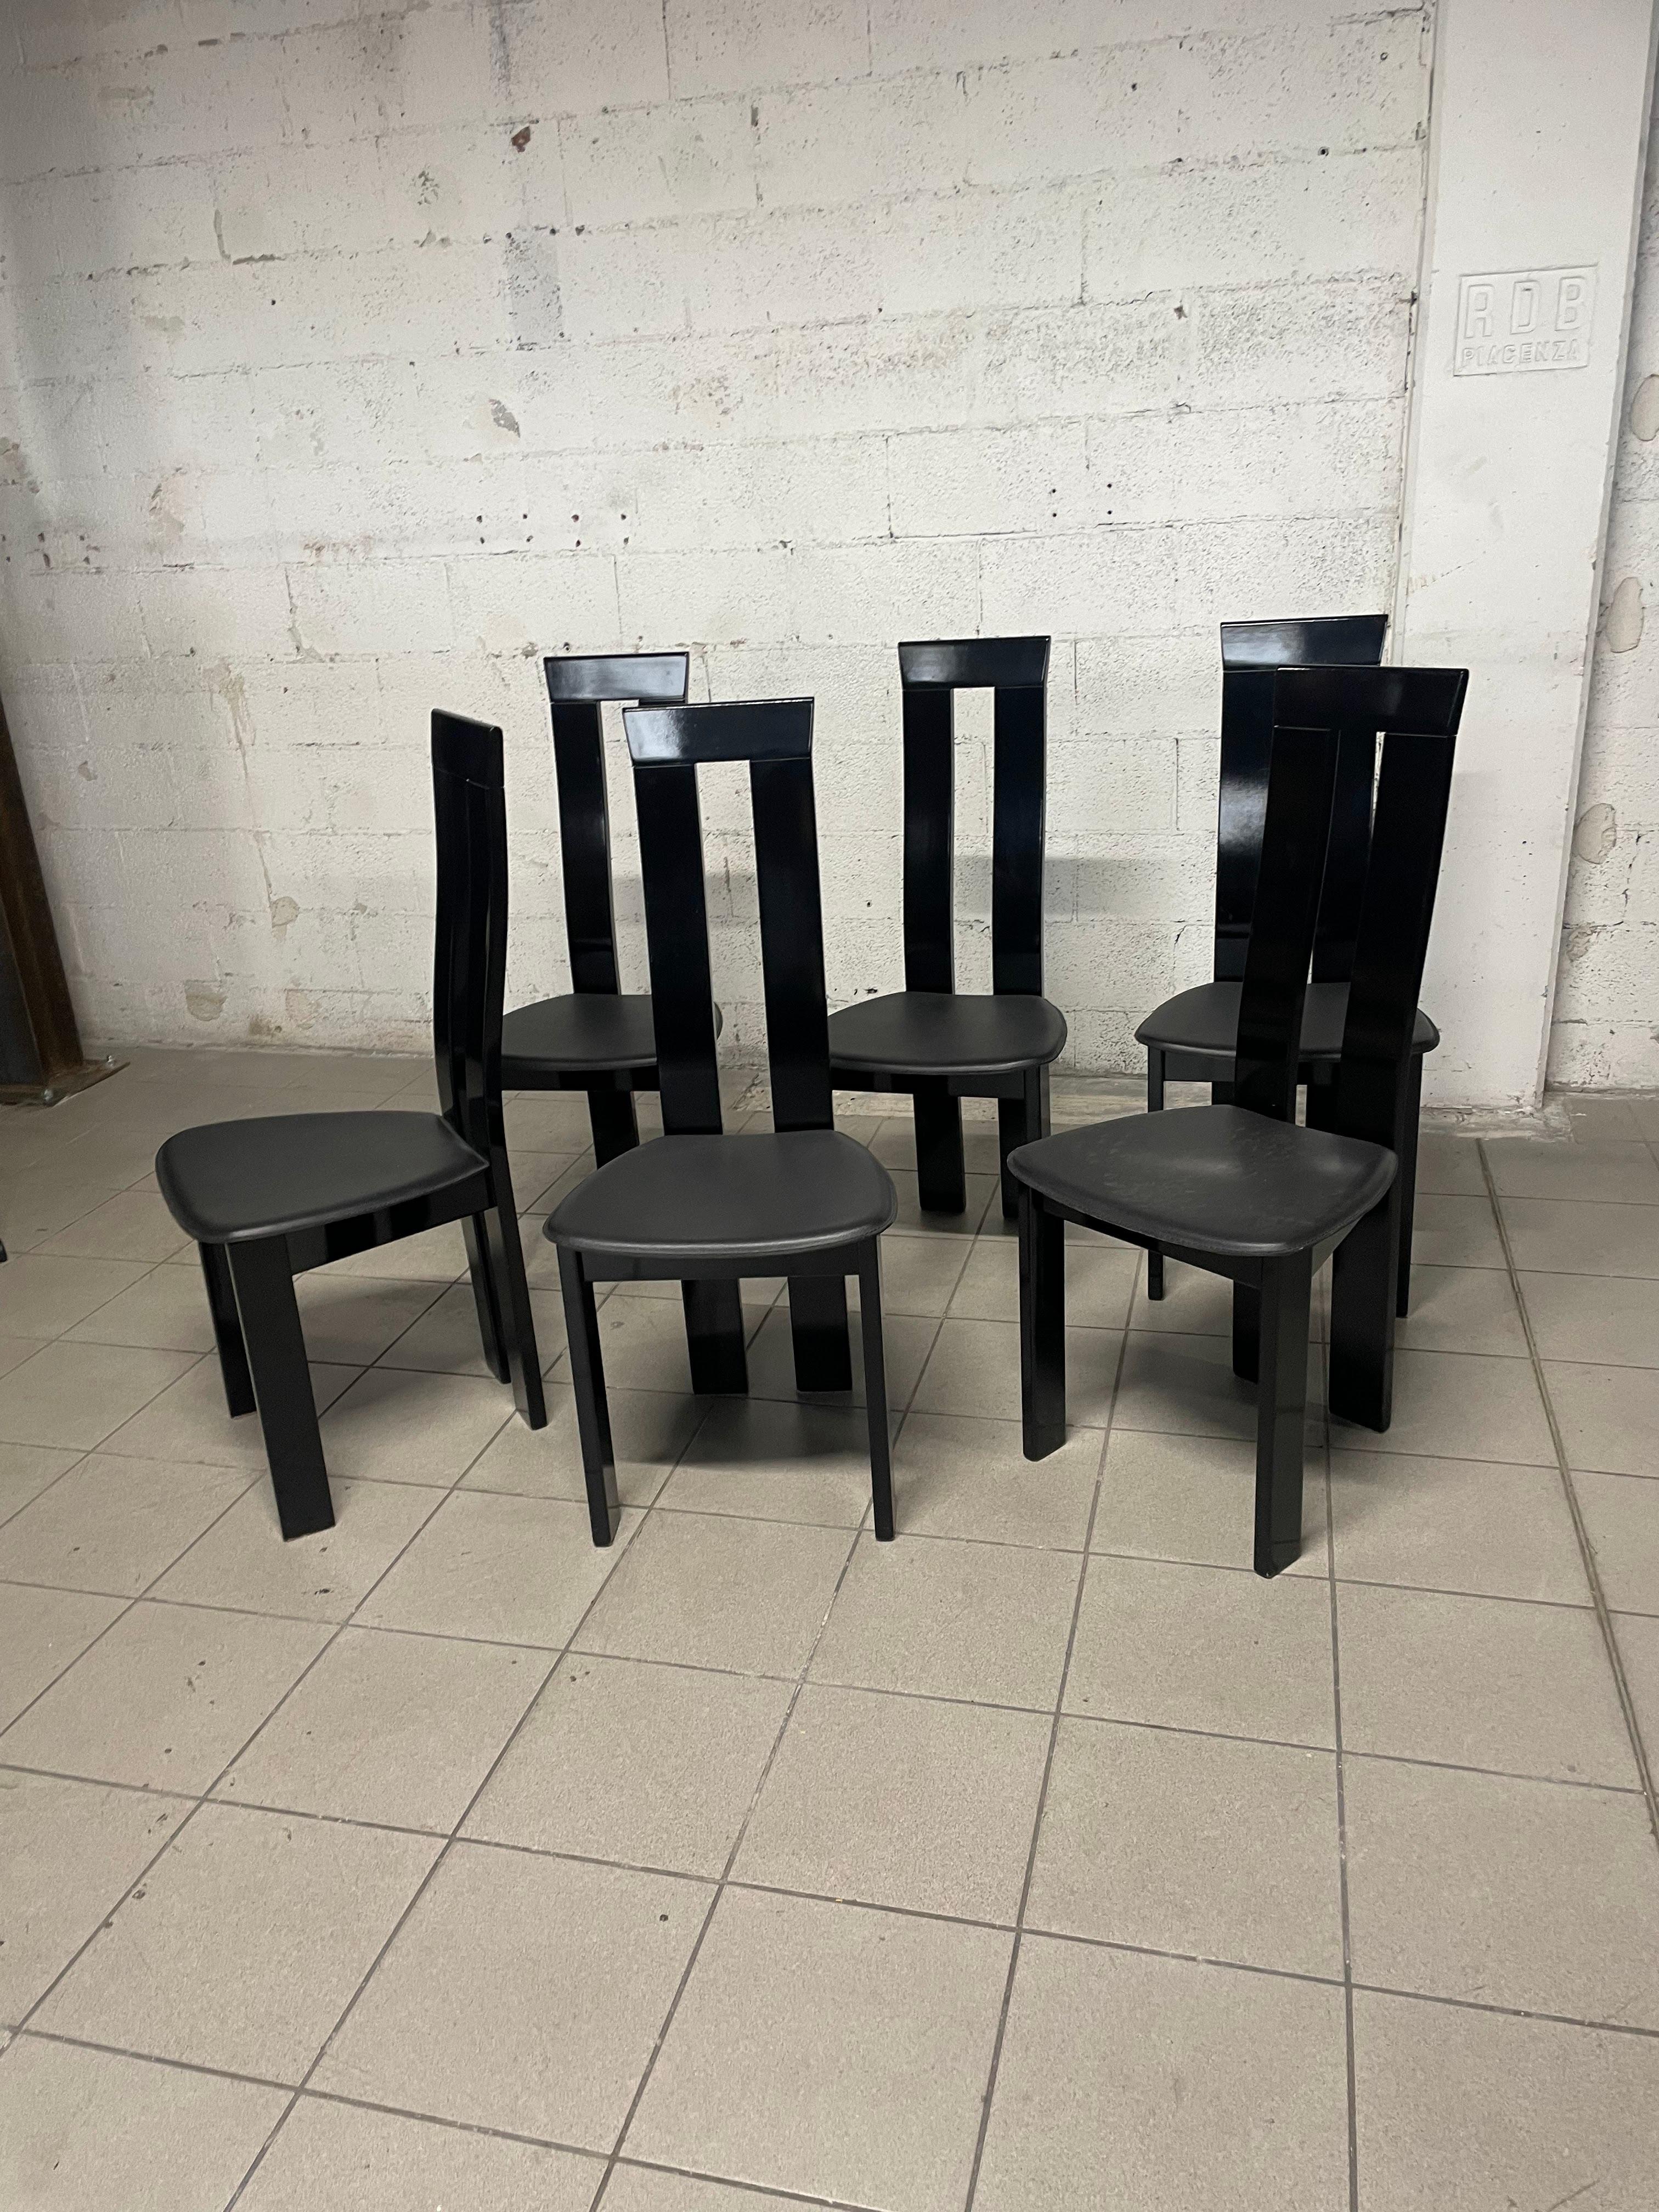 Set of 6 chairs from the 1970s in the Pietro Costantini style.

The chairs have a beech wood frame and leather seat.

Condition of the set very good.